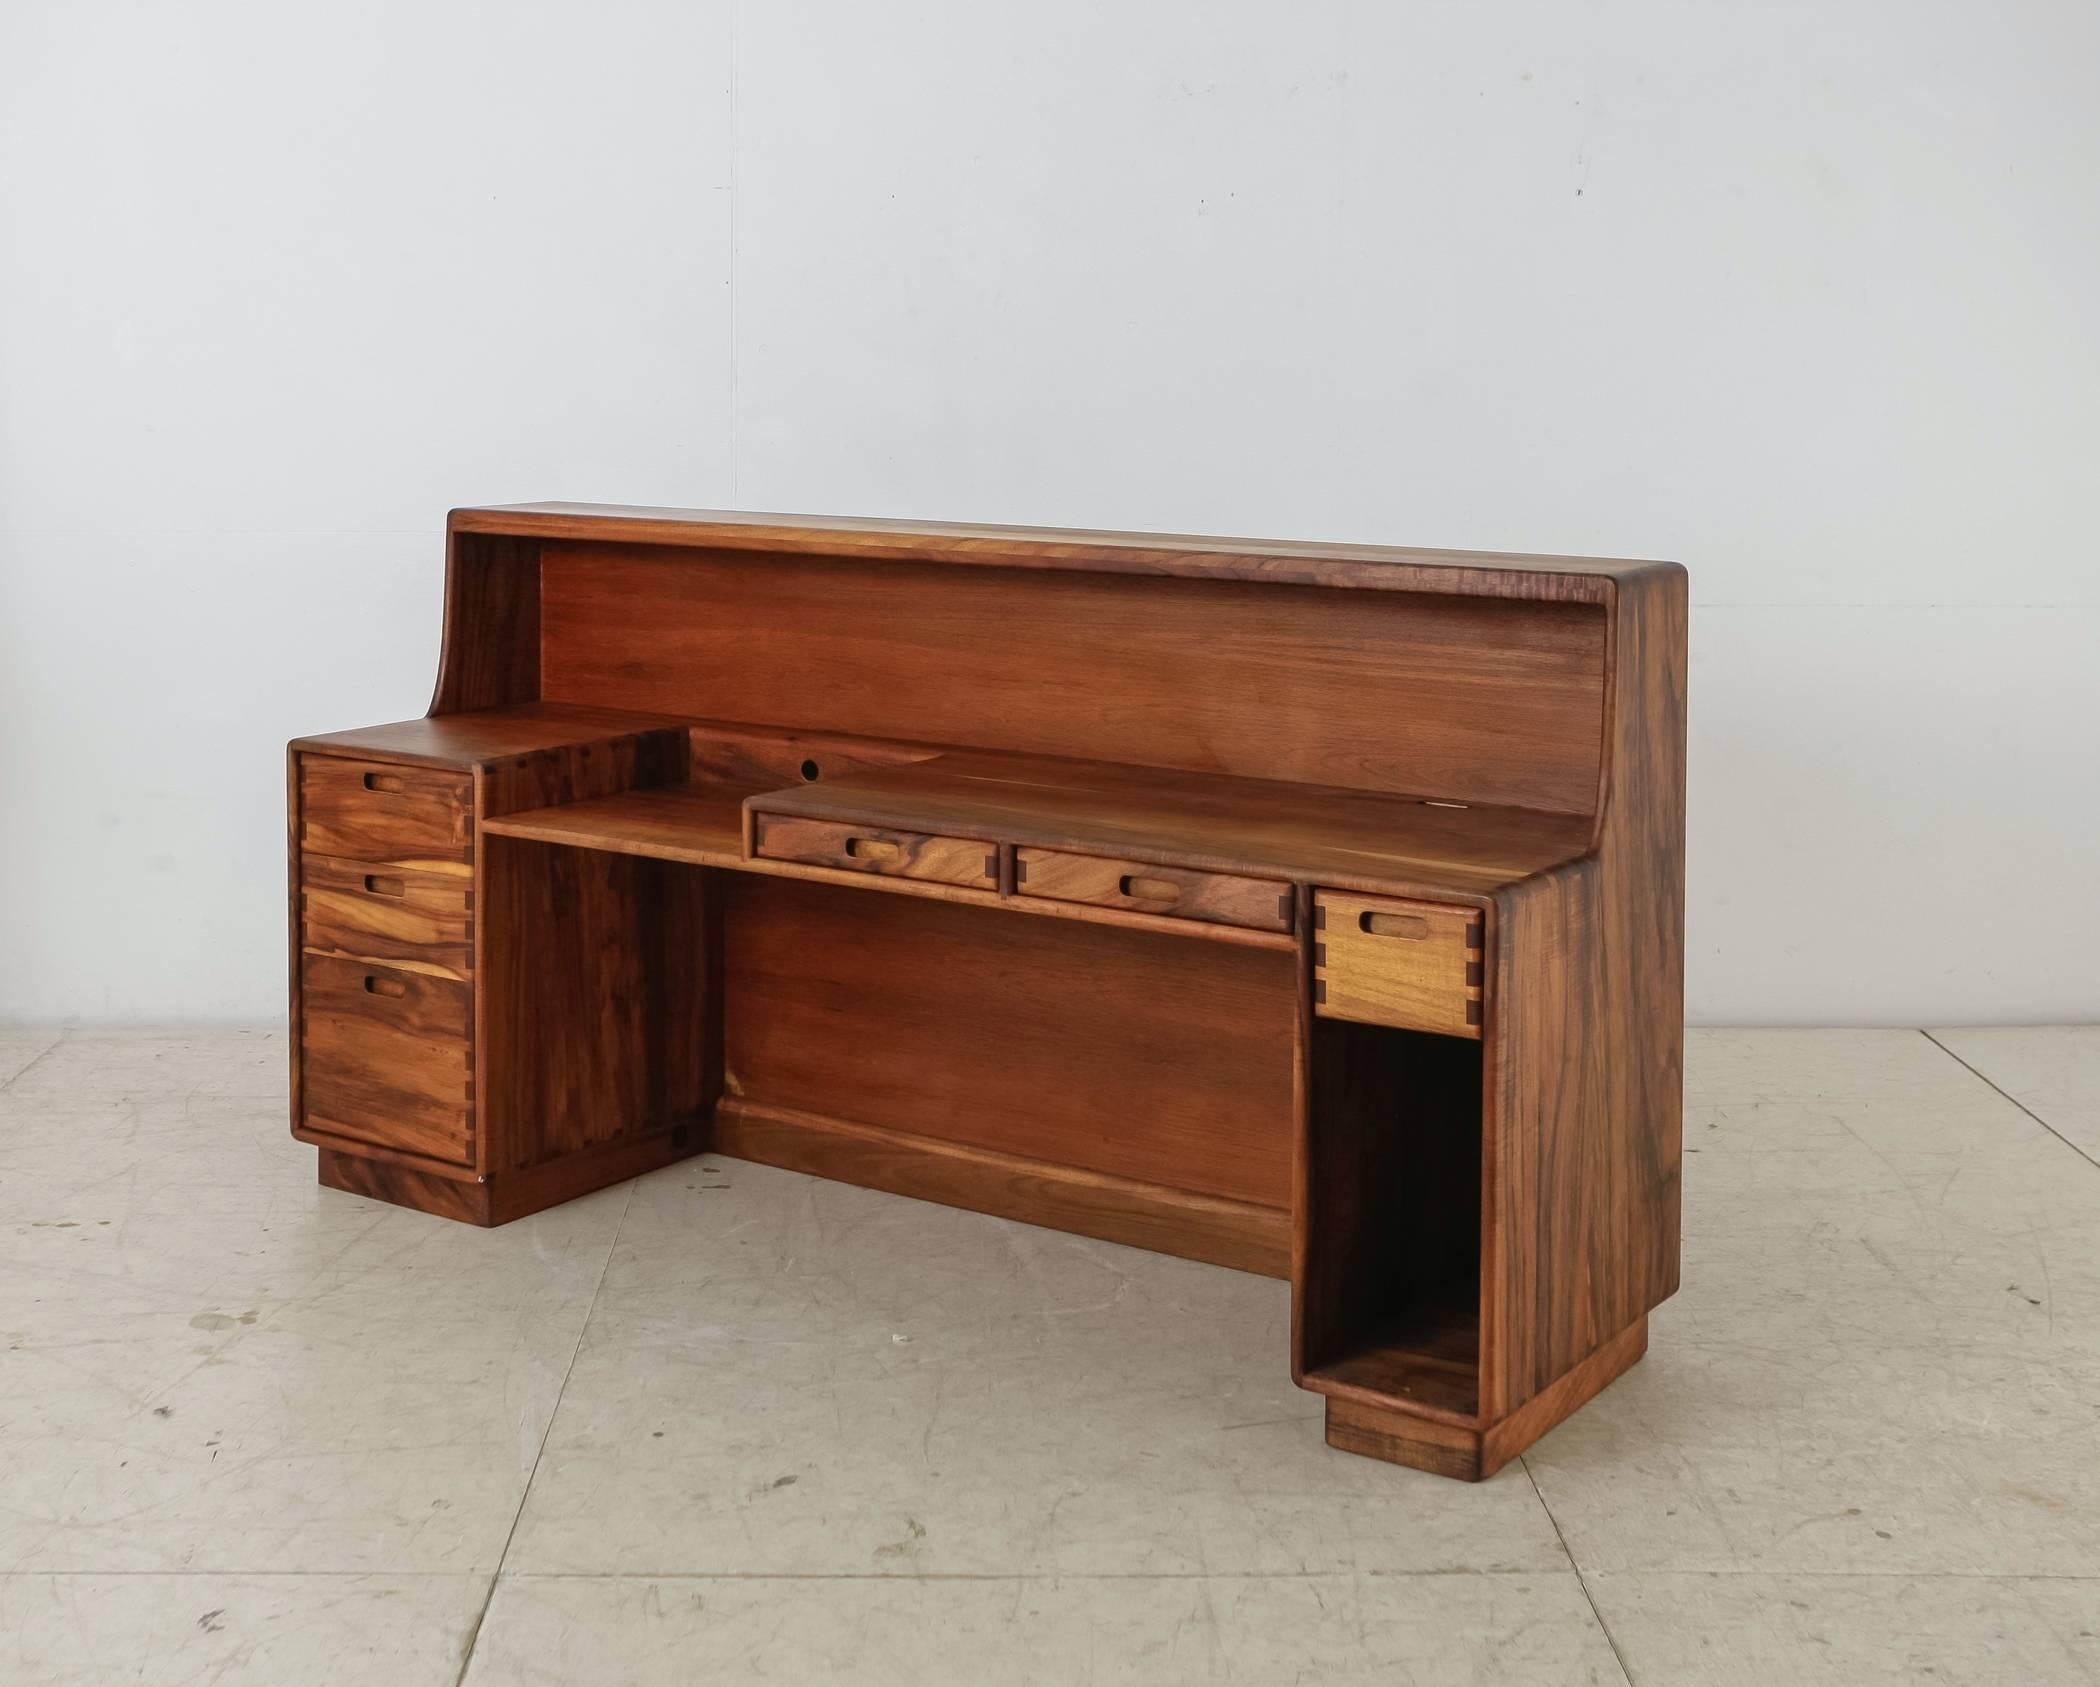 American Craftsman Unique and Large Jim Sweeney Wooden Studio Craft Desk, USA, 1970s For Sale